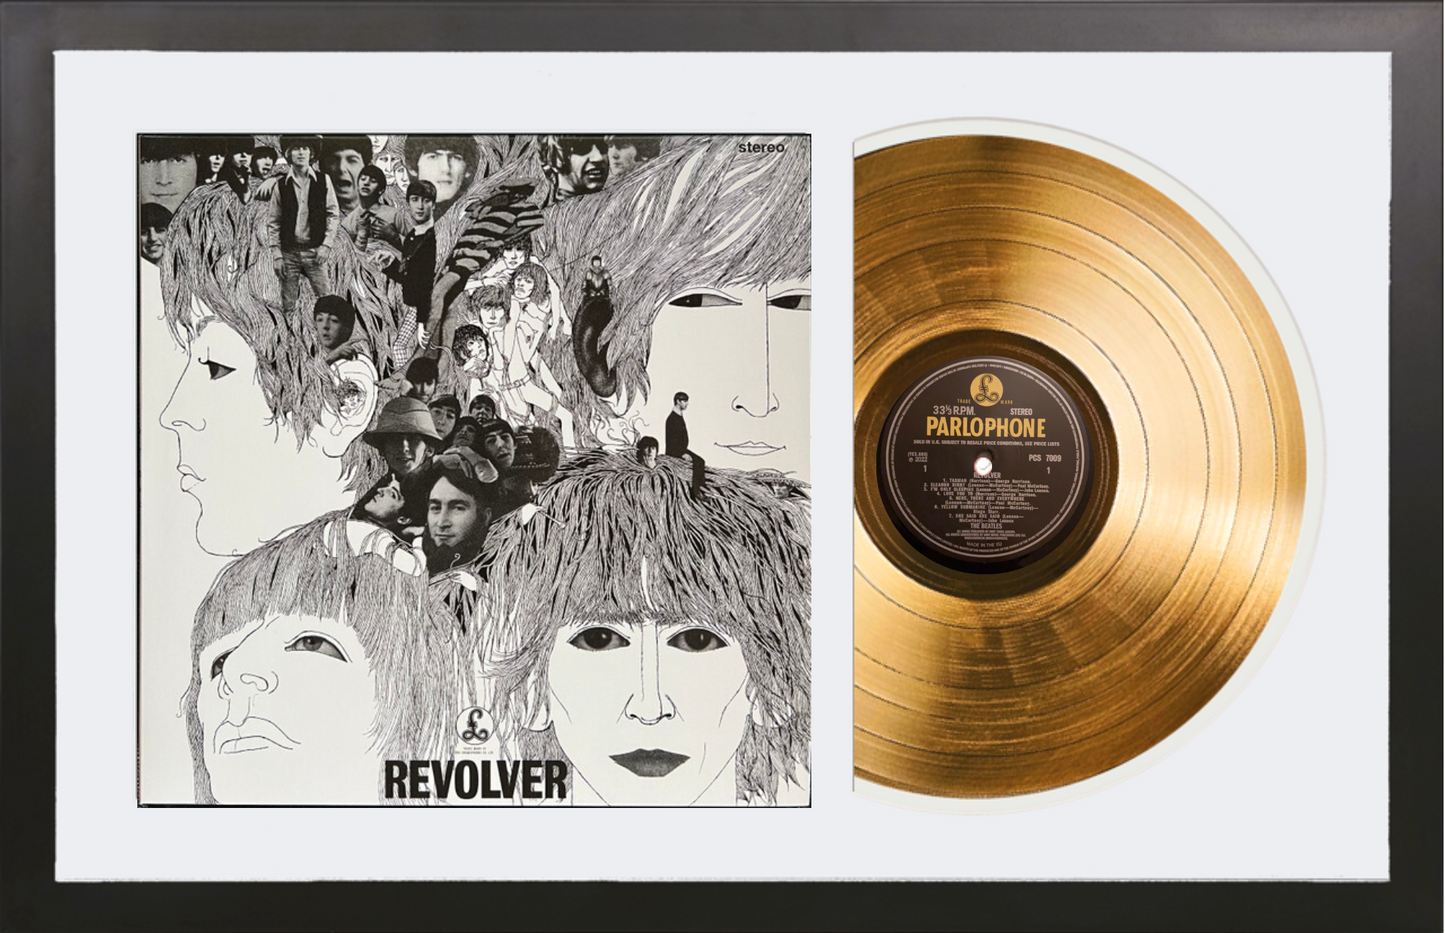 The Beatles - Revolver - 14K Gold Record - Limited Edition Vinyl